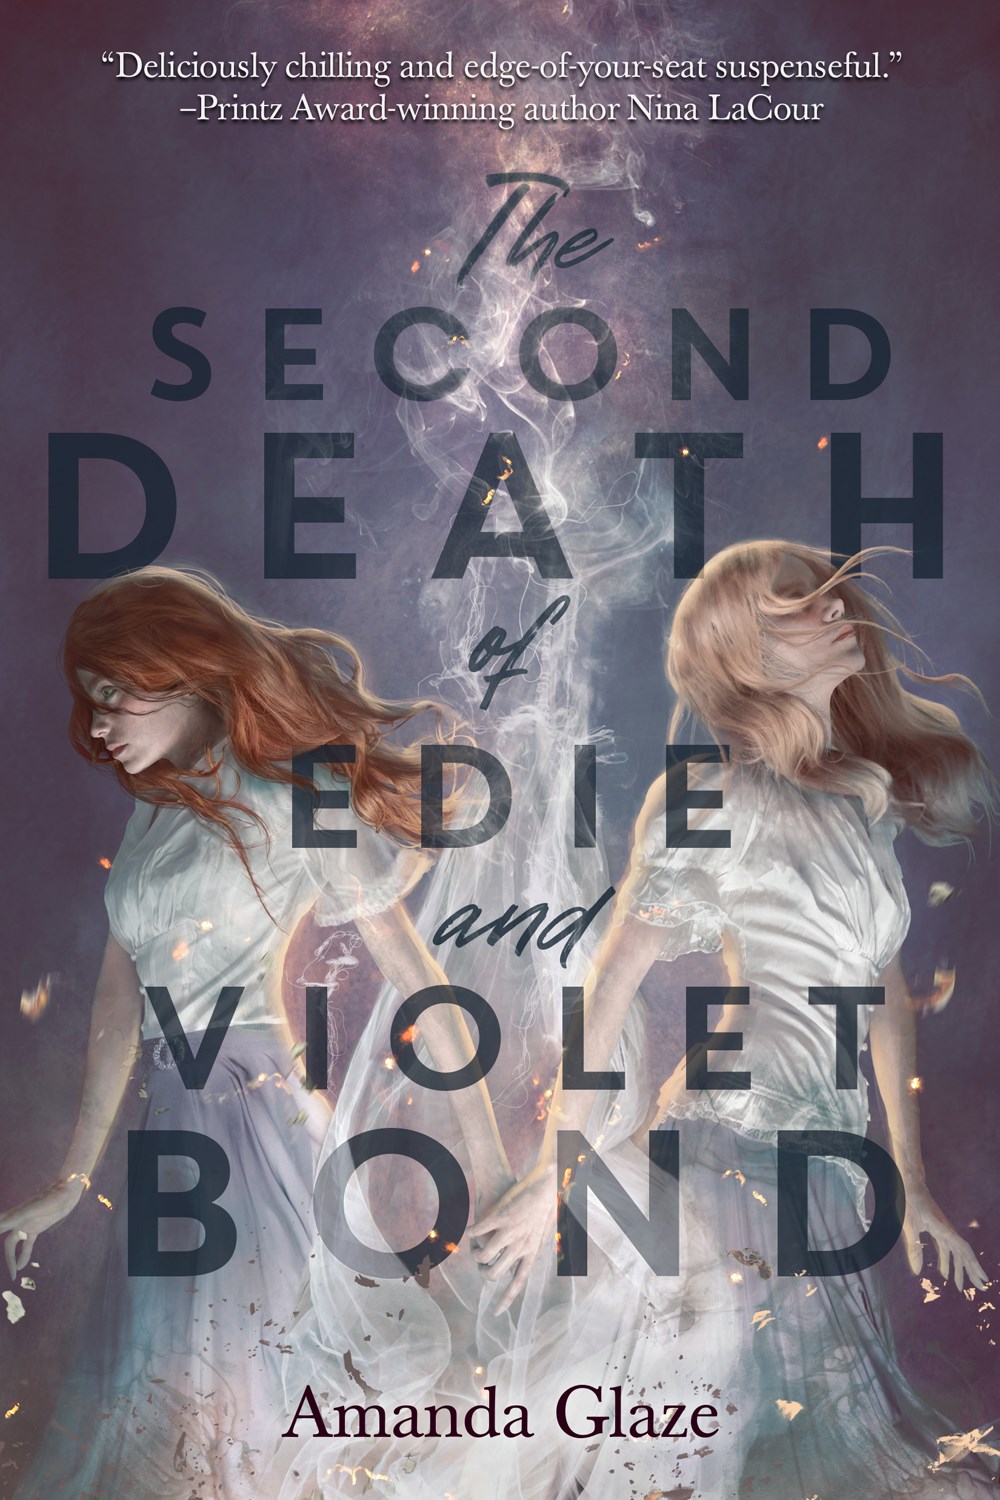 The Second Death of Edie and Vi - Amanda Glaze